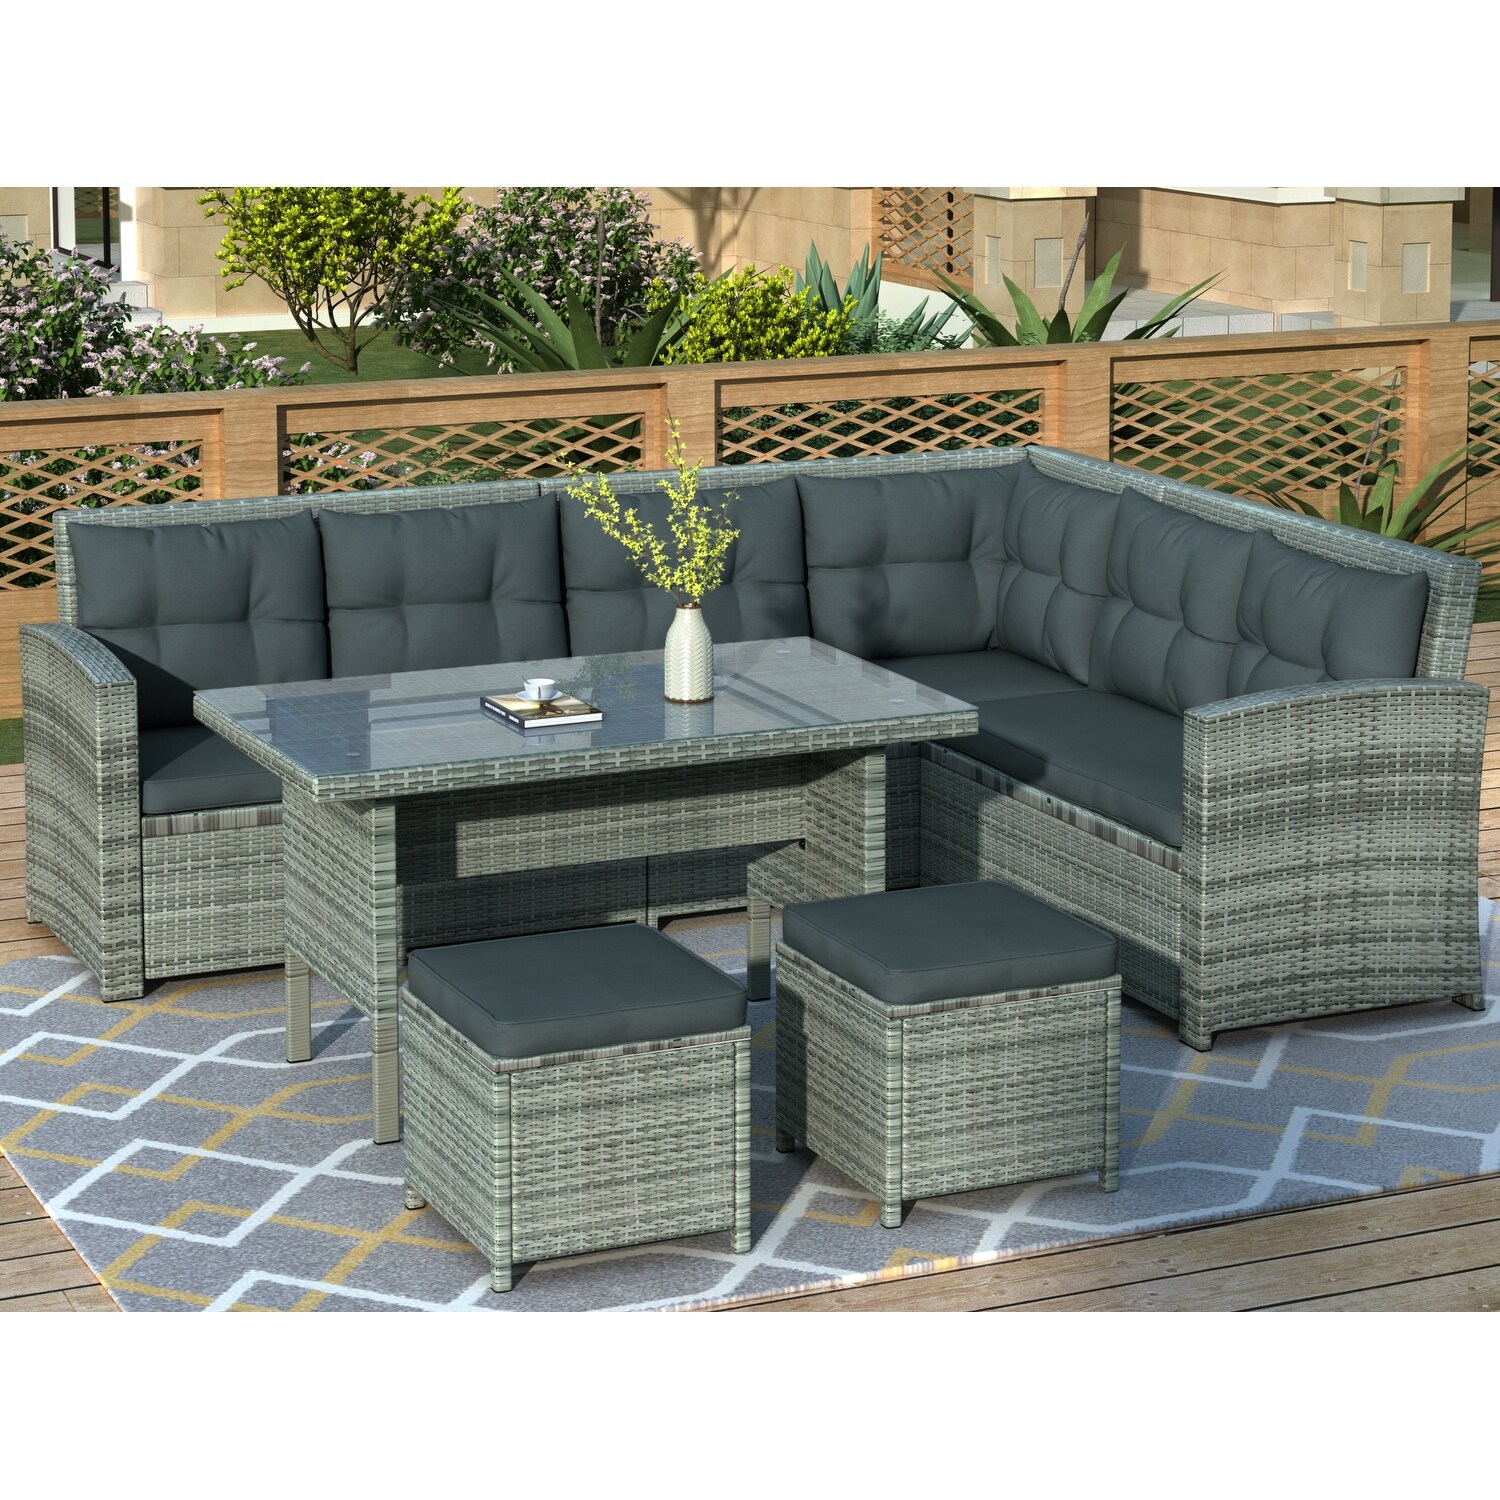 Malwee 6 Piece Outdoor Patio Furniture Set outdoor Sectional Sofa all Weather Wicker Conversation Set With Table And Ottoman